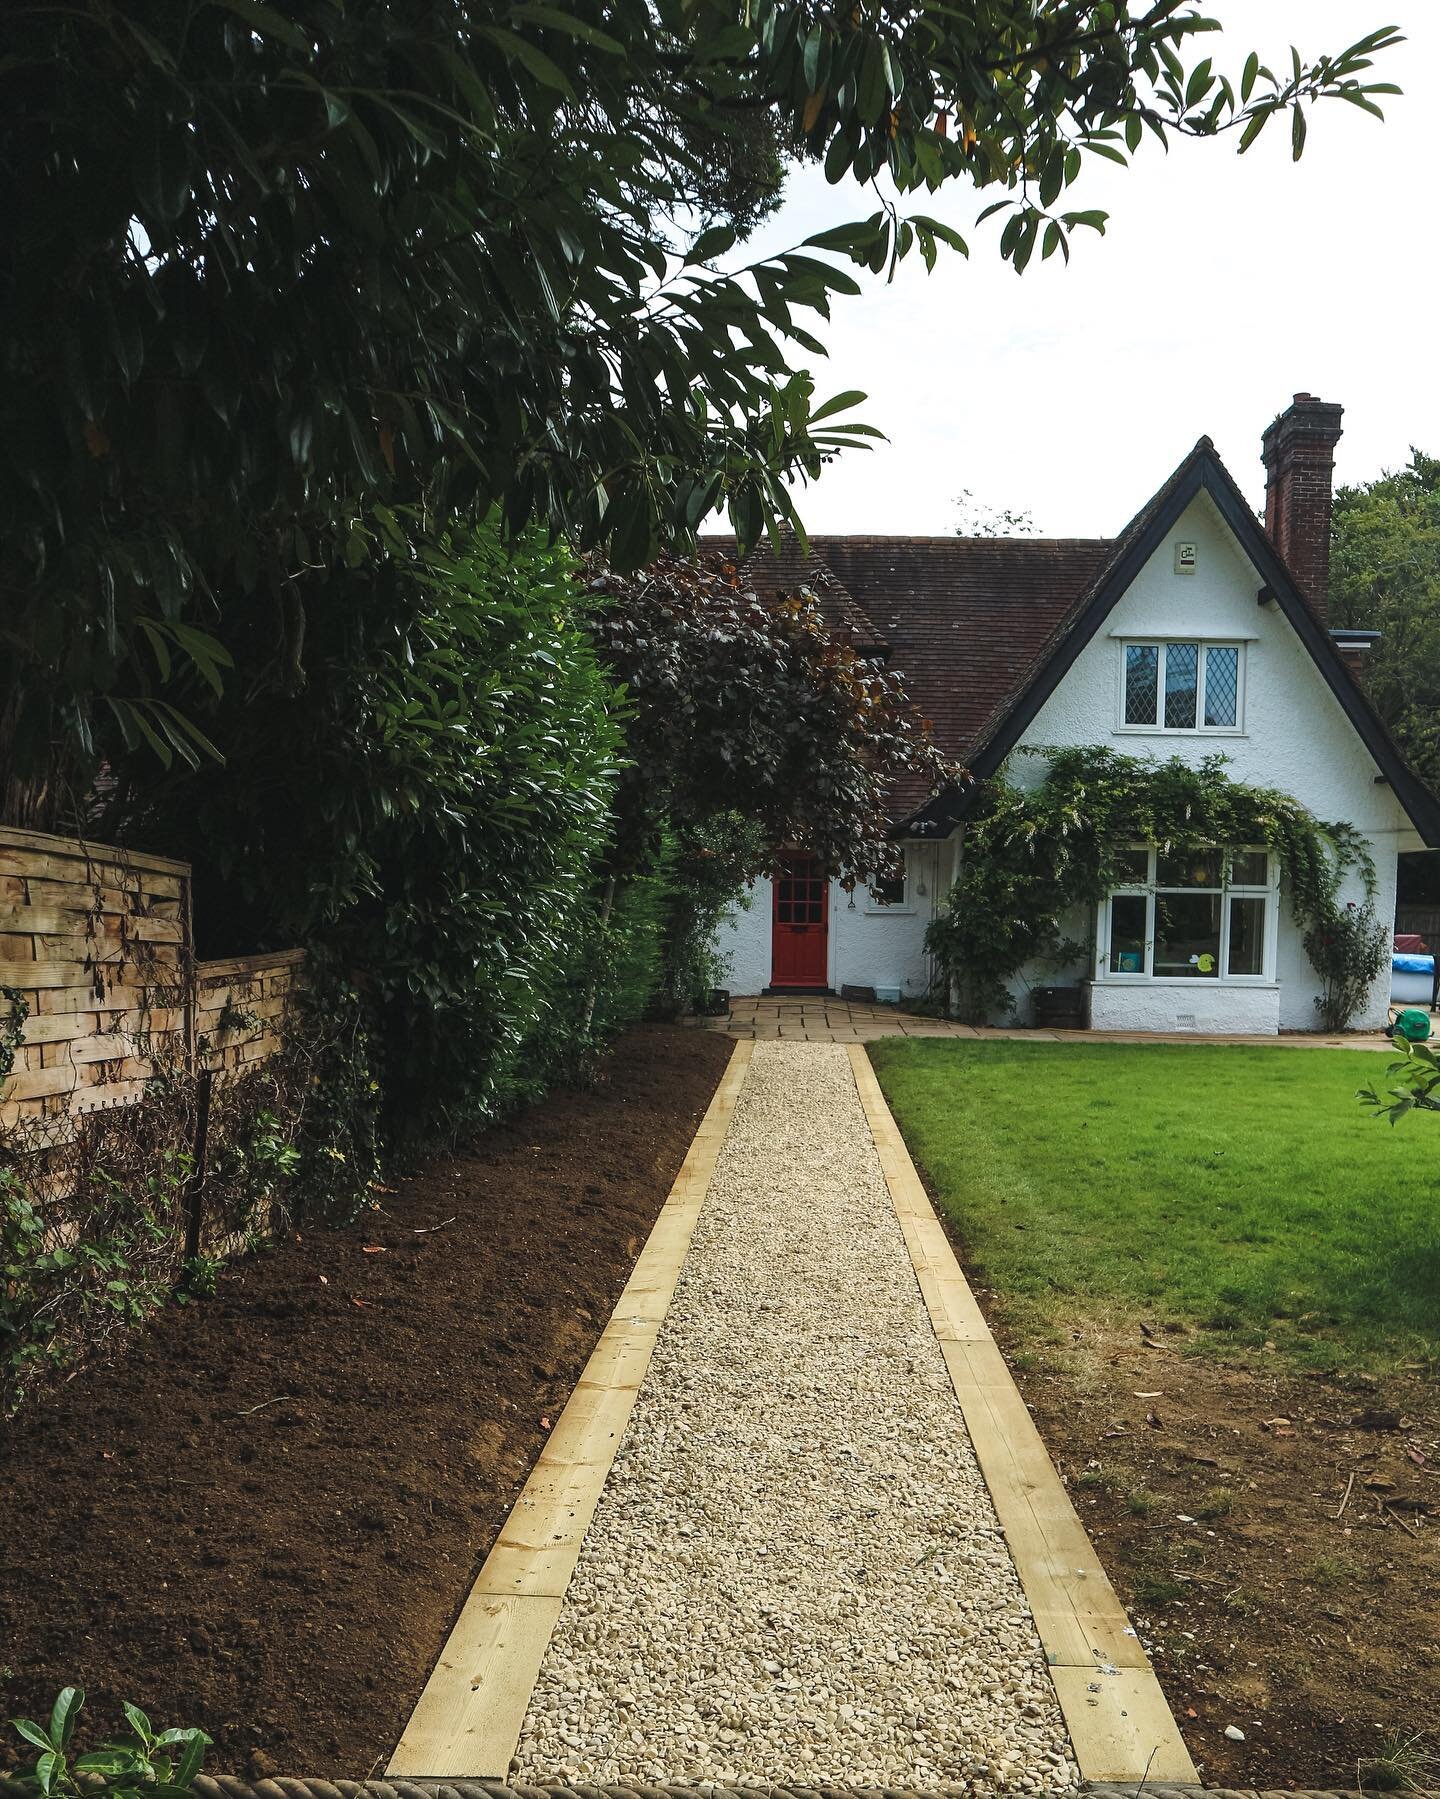 New sleeper pathway installation in South Heath using Cotswold shingle to contrast nicely against the new grade a top soil

For any questions you have or if you wish to organise a quote with us please feel free to contact directly on 07450272704/jsjg